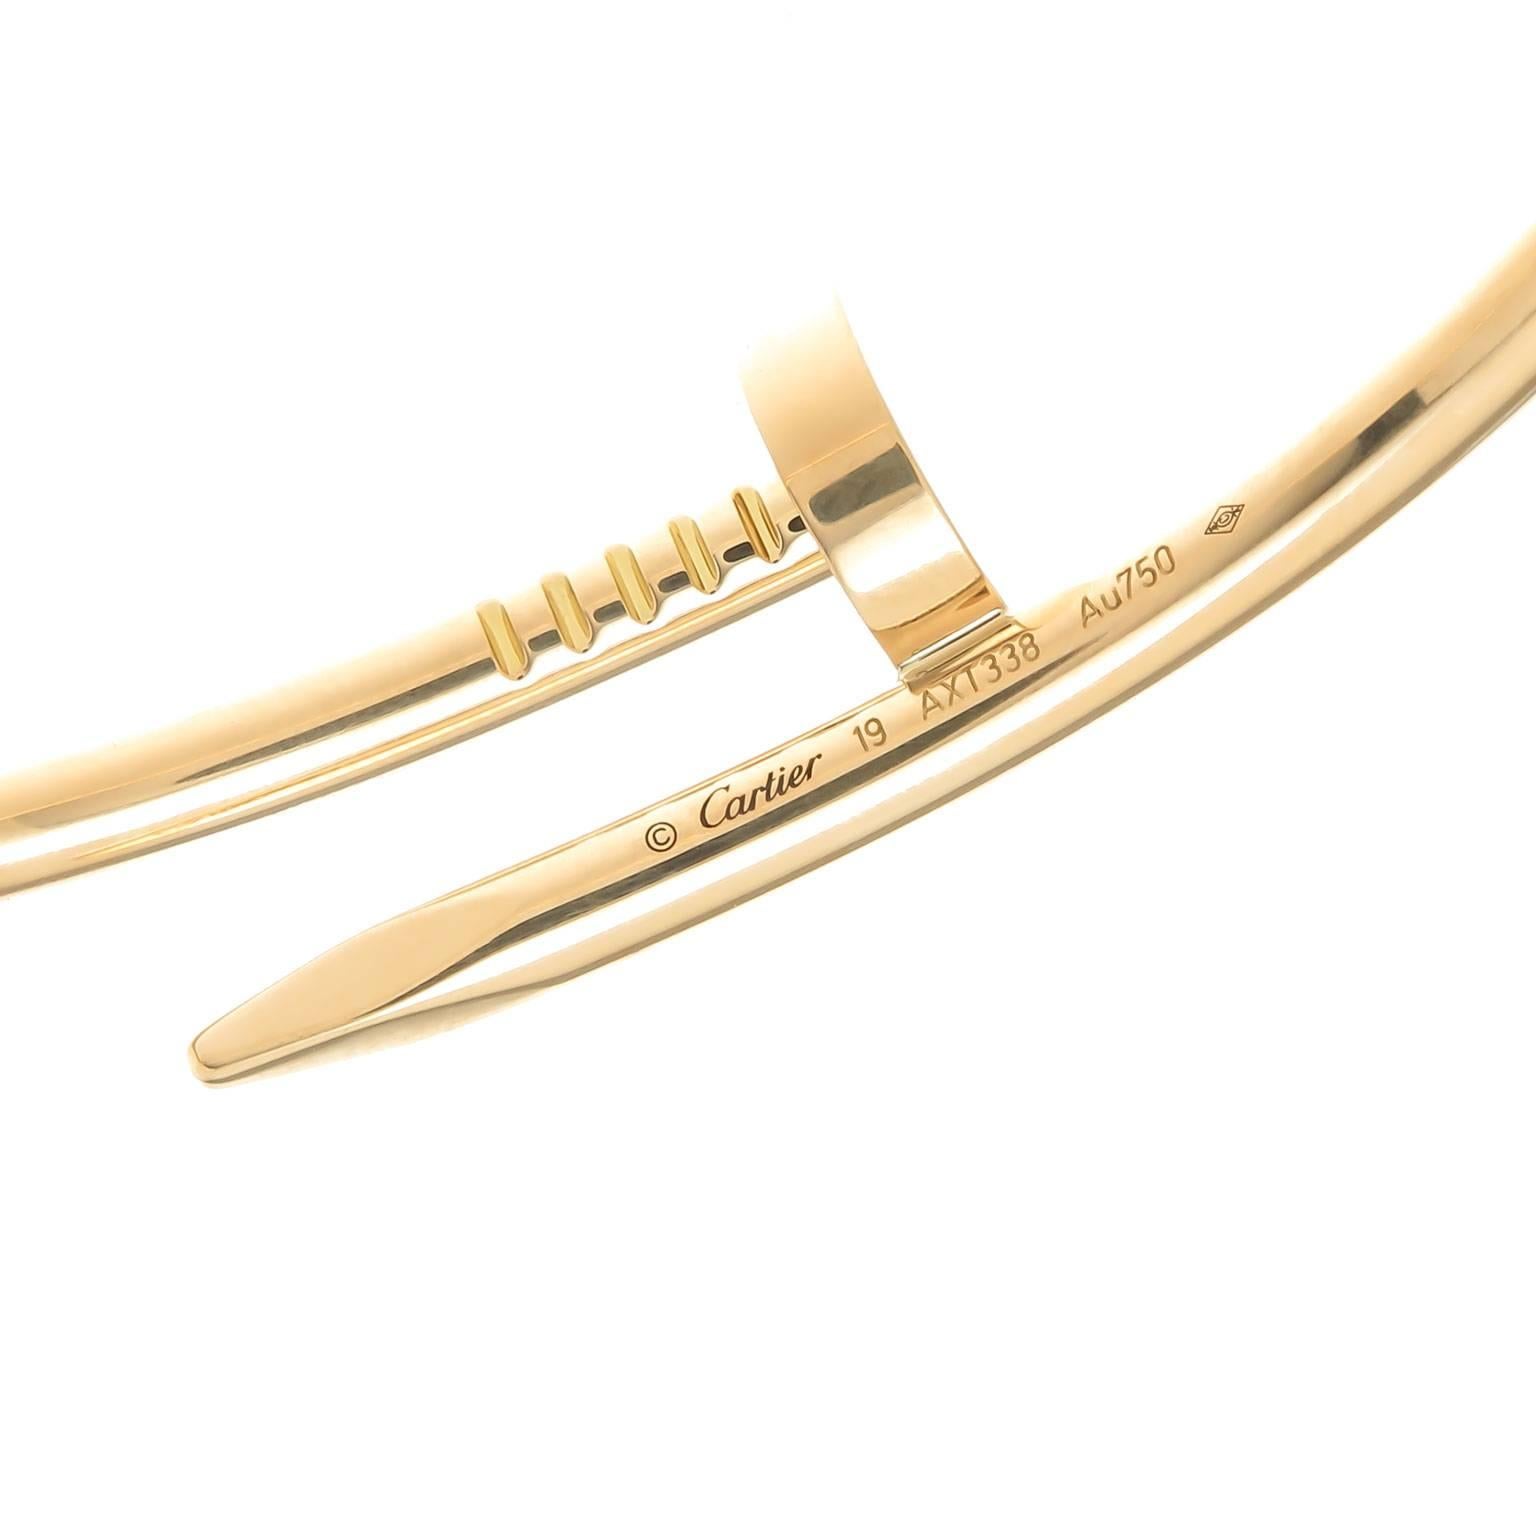 Circa 2014 Cartier Just Un Clou 18K yellow Gold size 19 Nail Bracelet. Signed and Numbered and comes in original Cartier Suede travel pouch. 